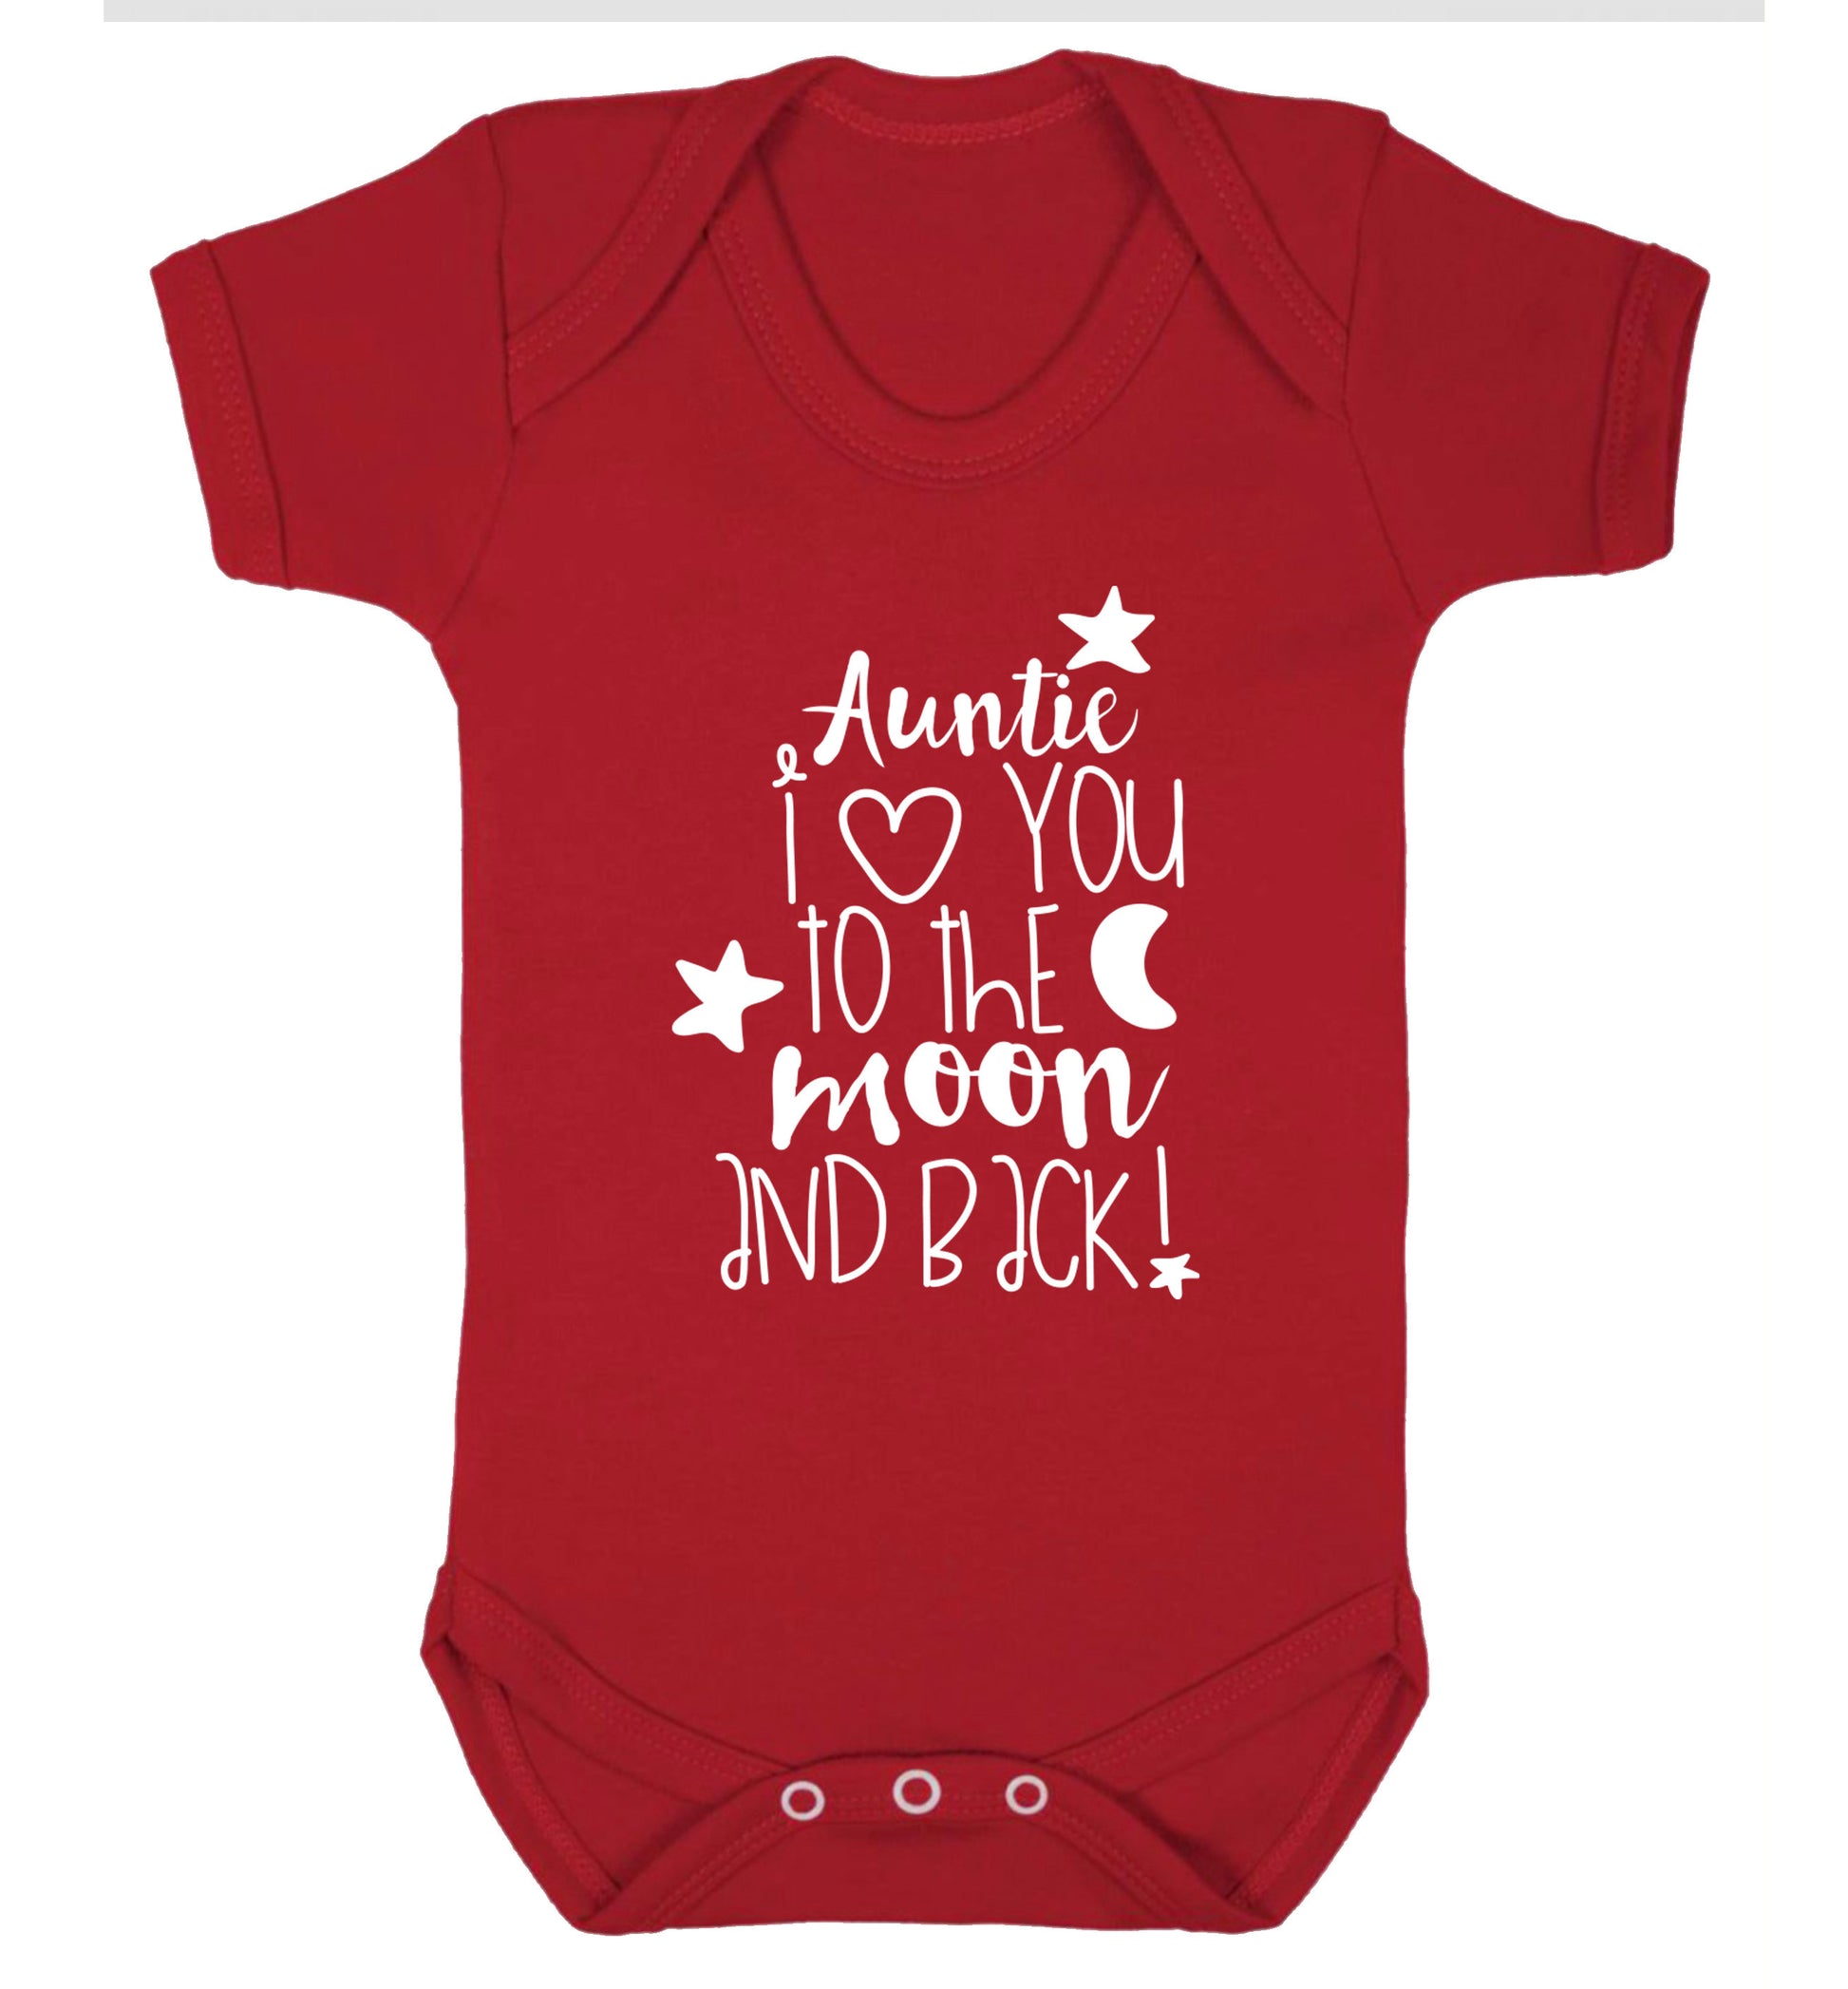 Auntie I love you to the moon and back Baby Vest red 18-24 months